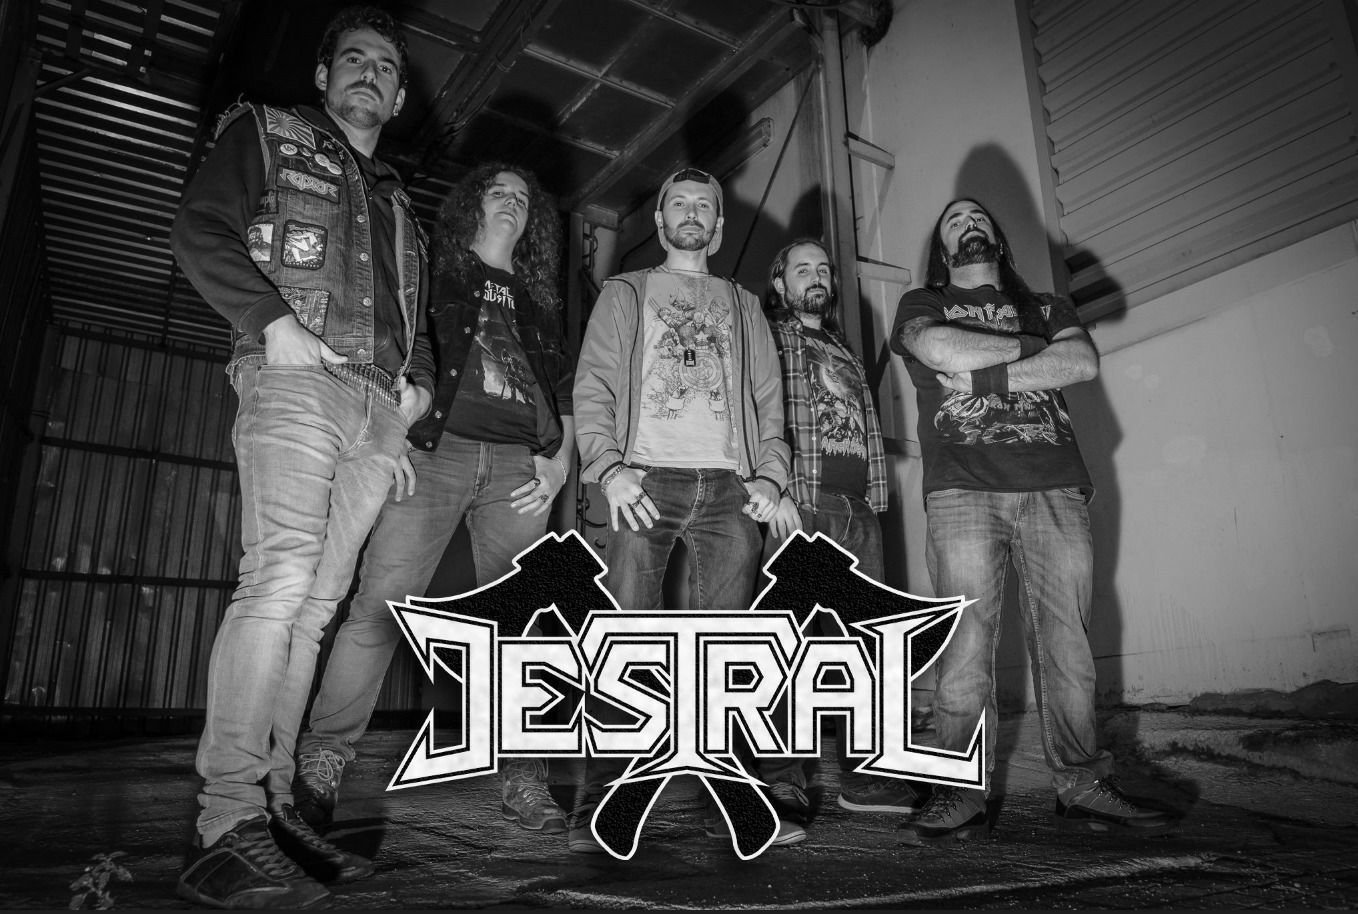 Interview with DESTRAL